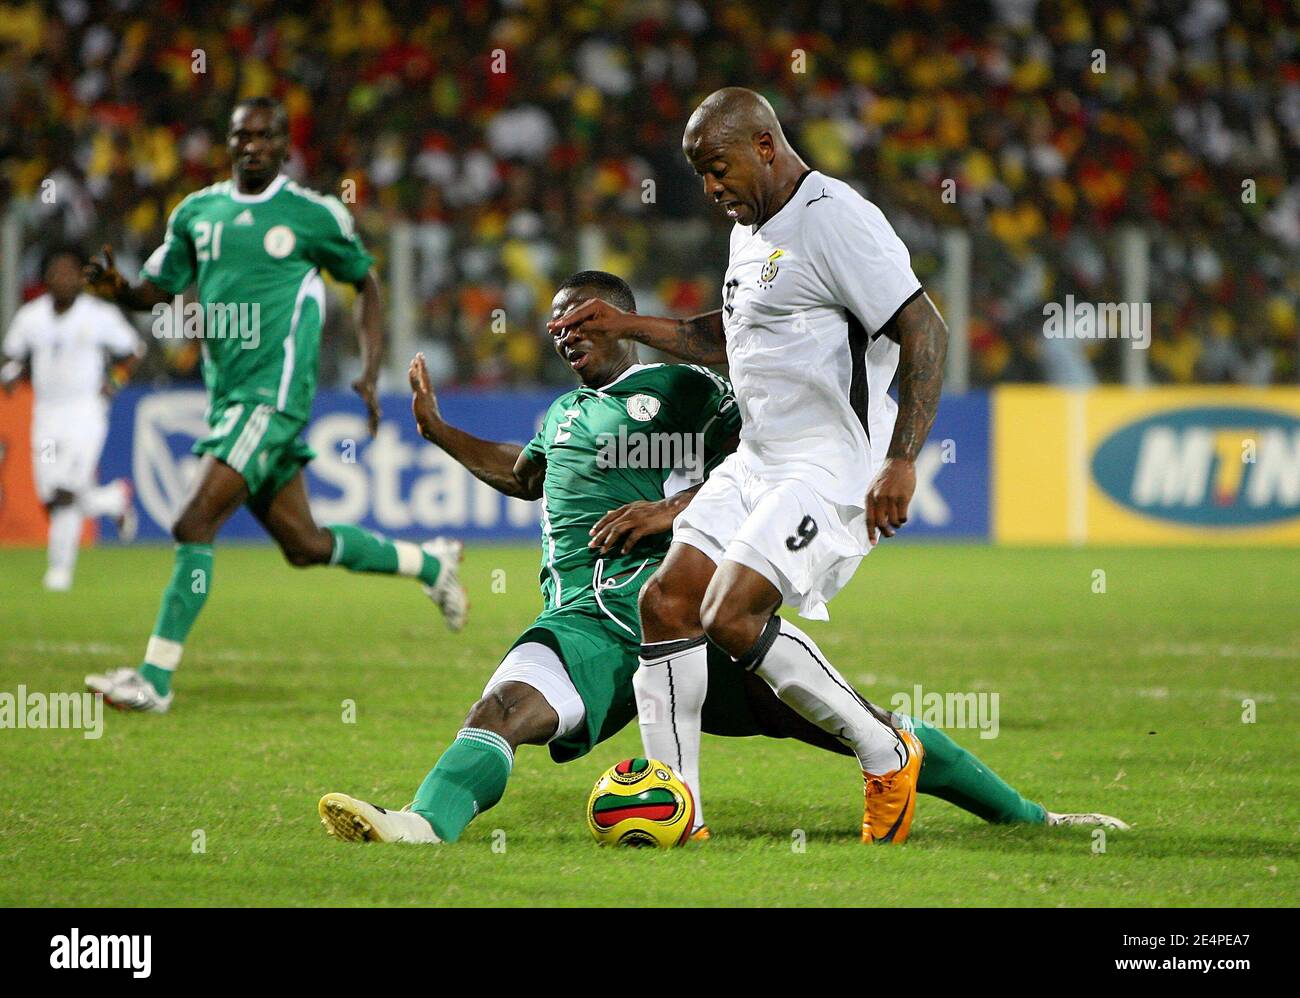 Ghana's Agogo Manuel is challenged by Nigeria's Joseph Yobo during the African Cup of Nations, quarter finals, soccer match, Ghana vs Nigeria in Accra, Ghana on February 3, 2008. The Ghana won 2-1. Photo by Steeve McMay/Cameleon/ABACAPRESS.COM Stock Photo